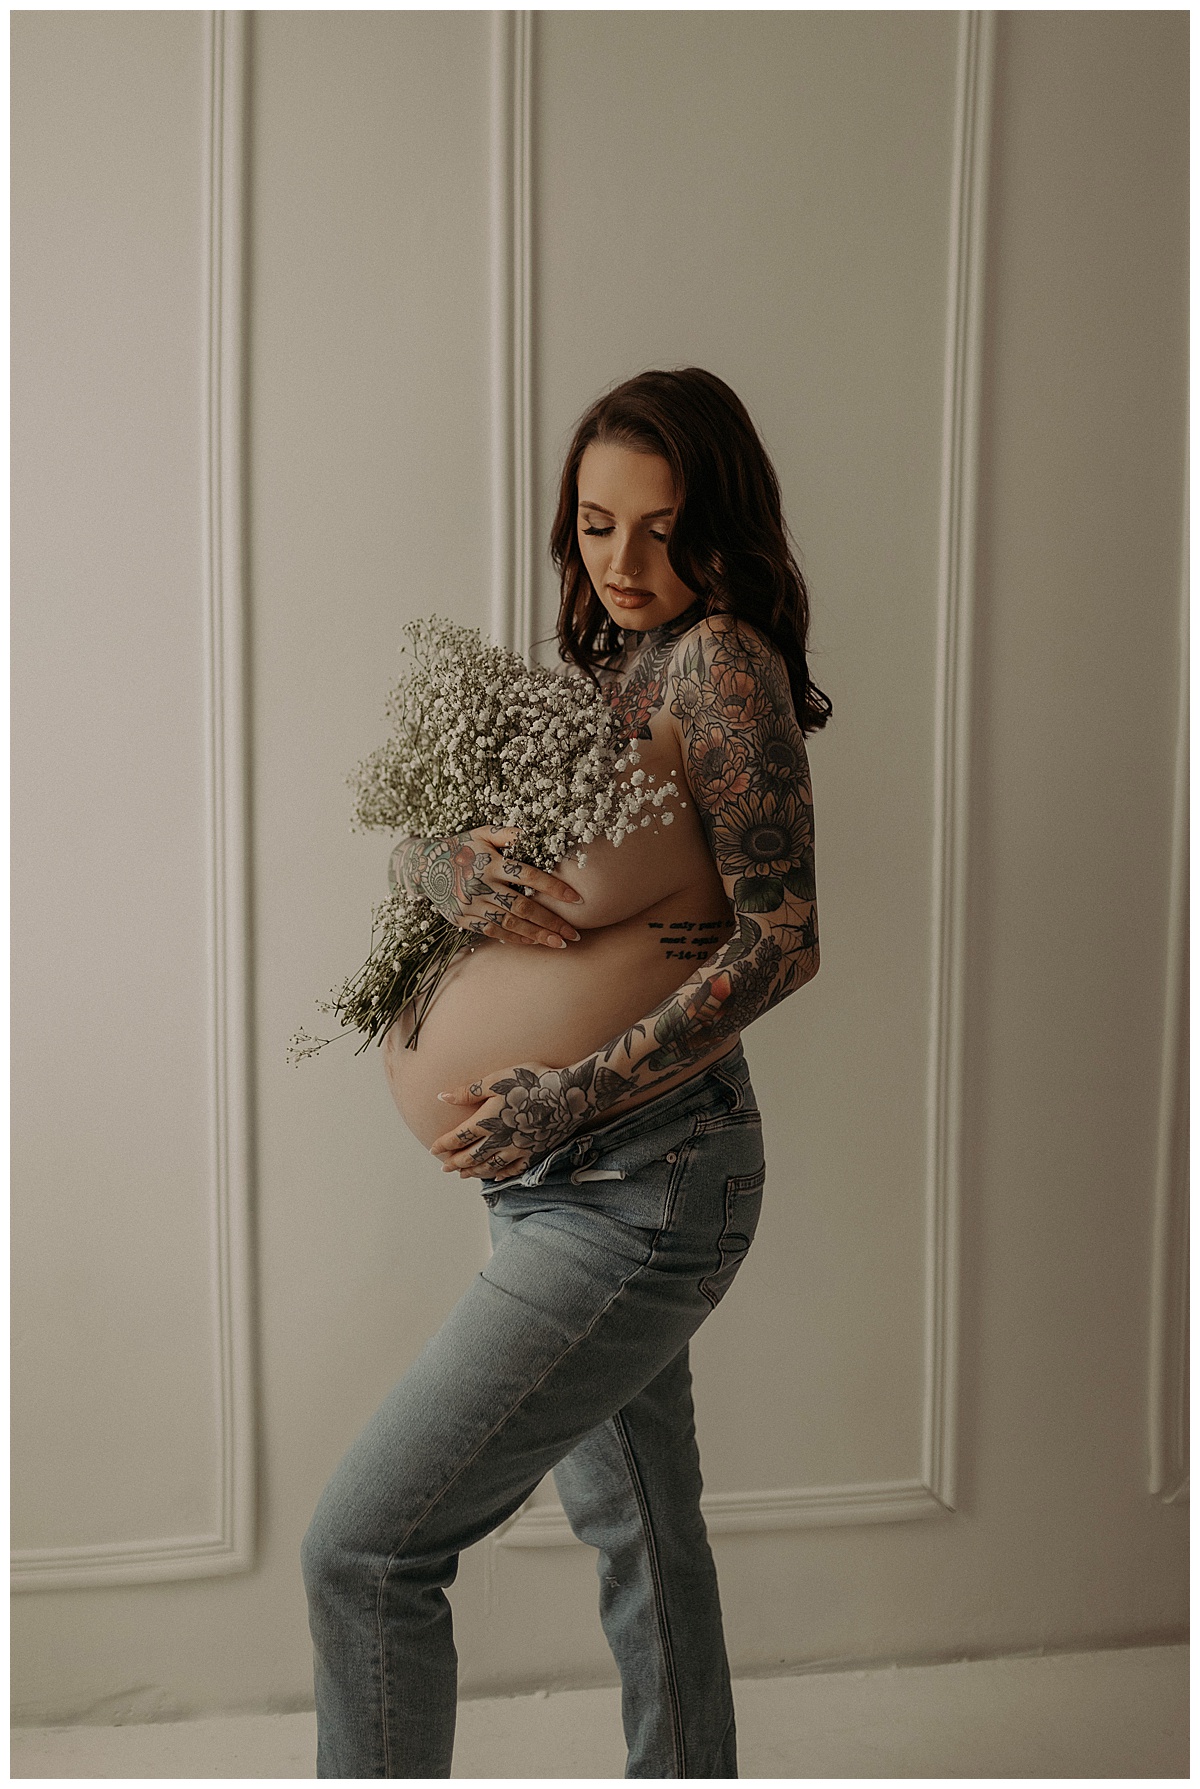 Woman cover her pregnant belly with bouquet of flowers for Mary Castillo Photography